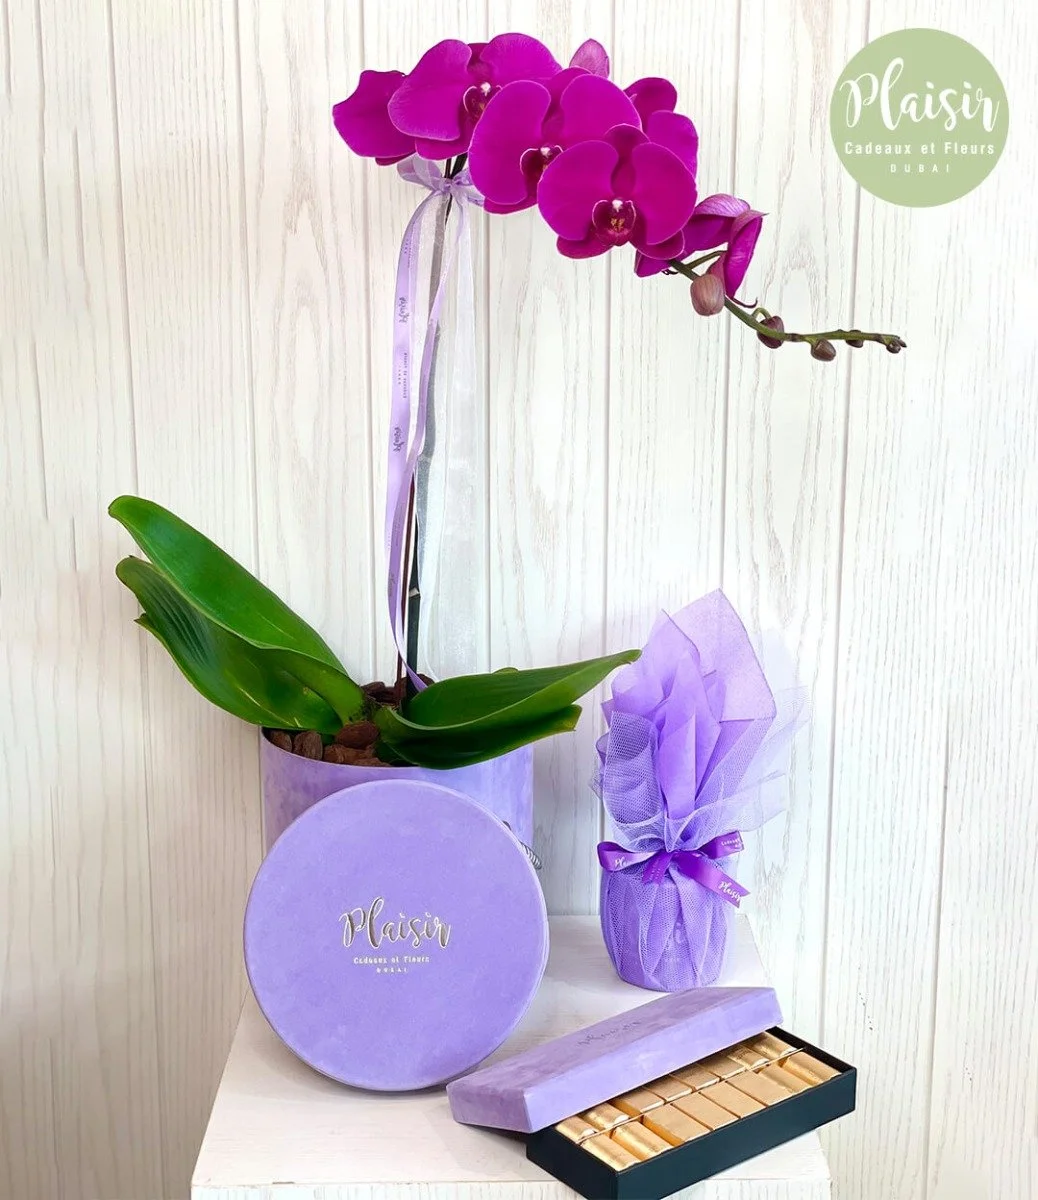 Single Orchid, Candle and Patchi Chocolate Giftset in Lilac By Plaisir